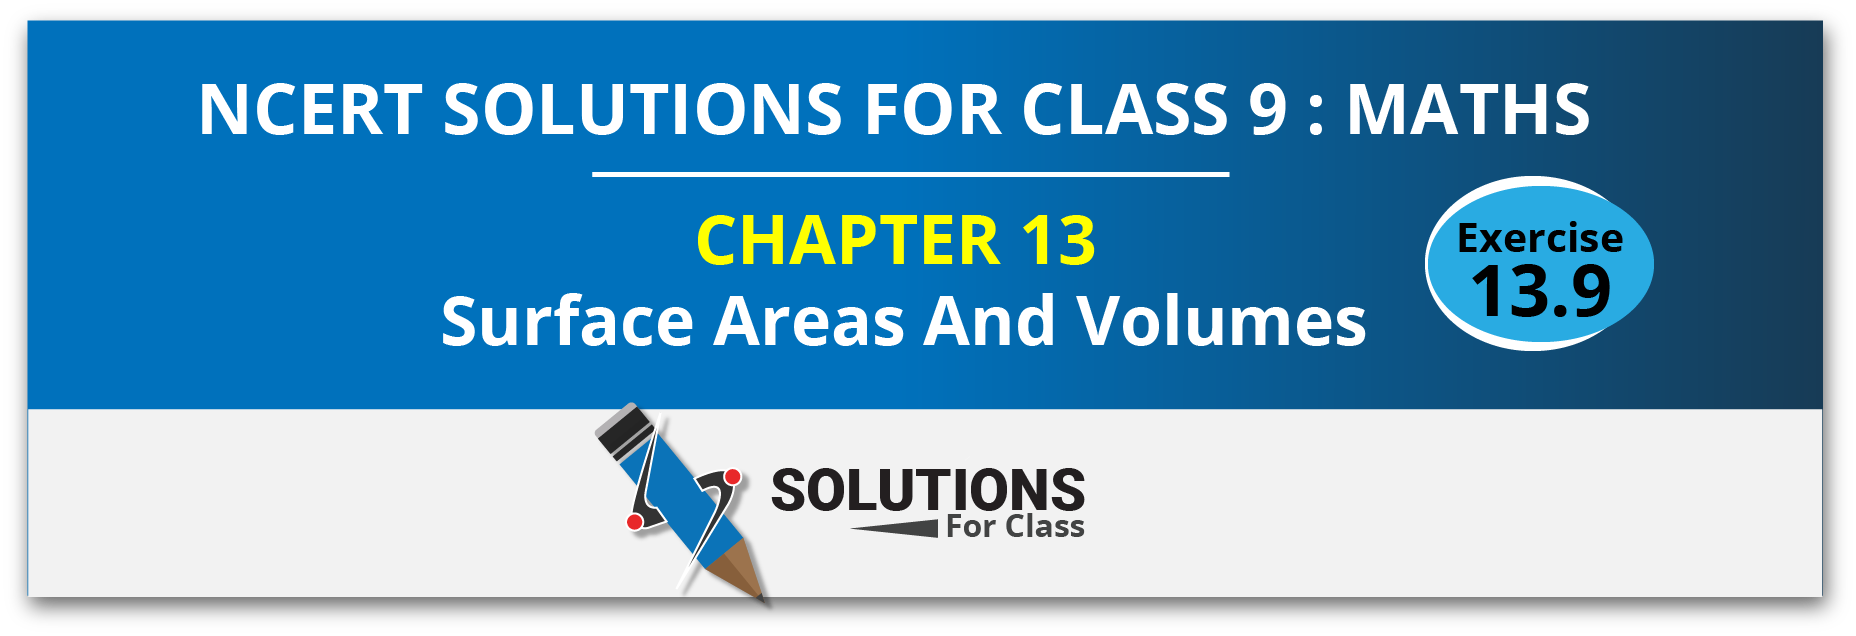 NCERT Solution For Class 9, Maths, Chapter 13, Surface Areas And Volumes, Exercise 13.9